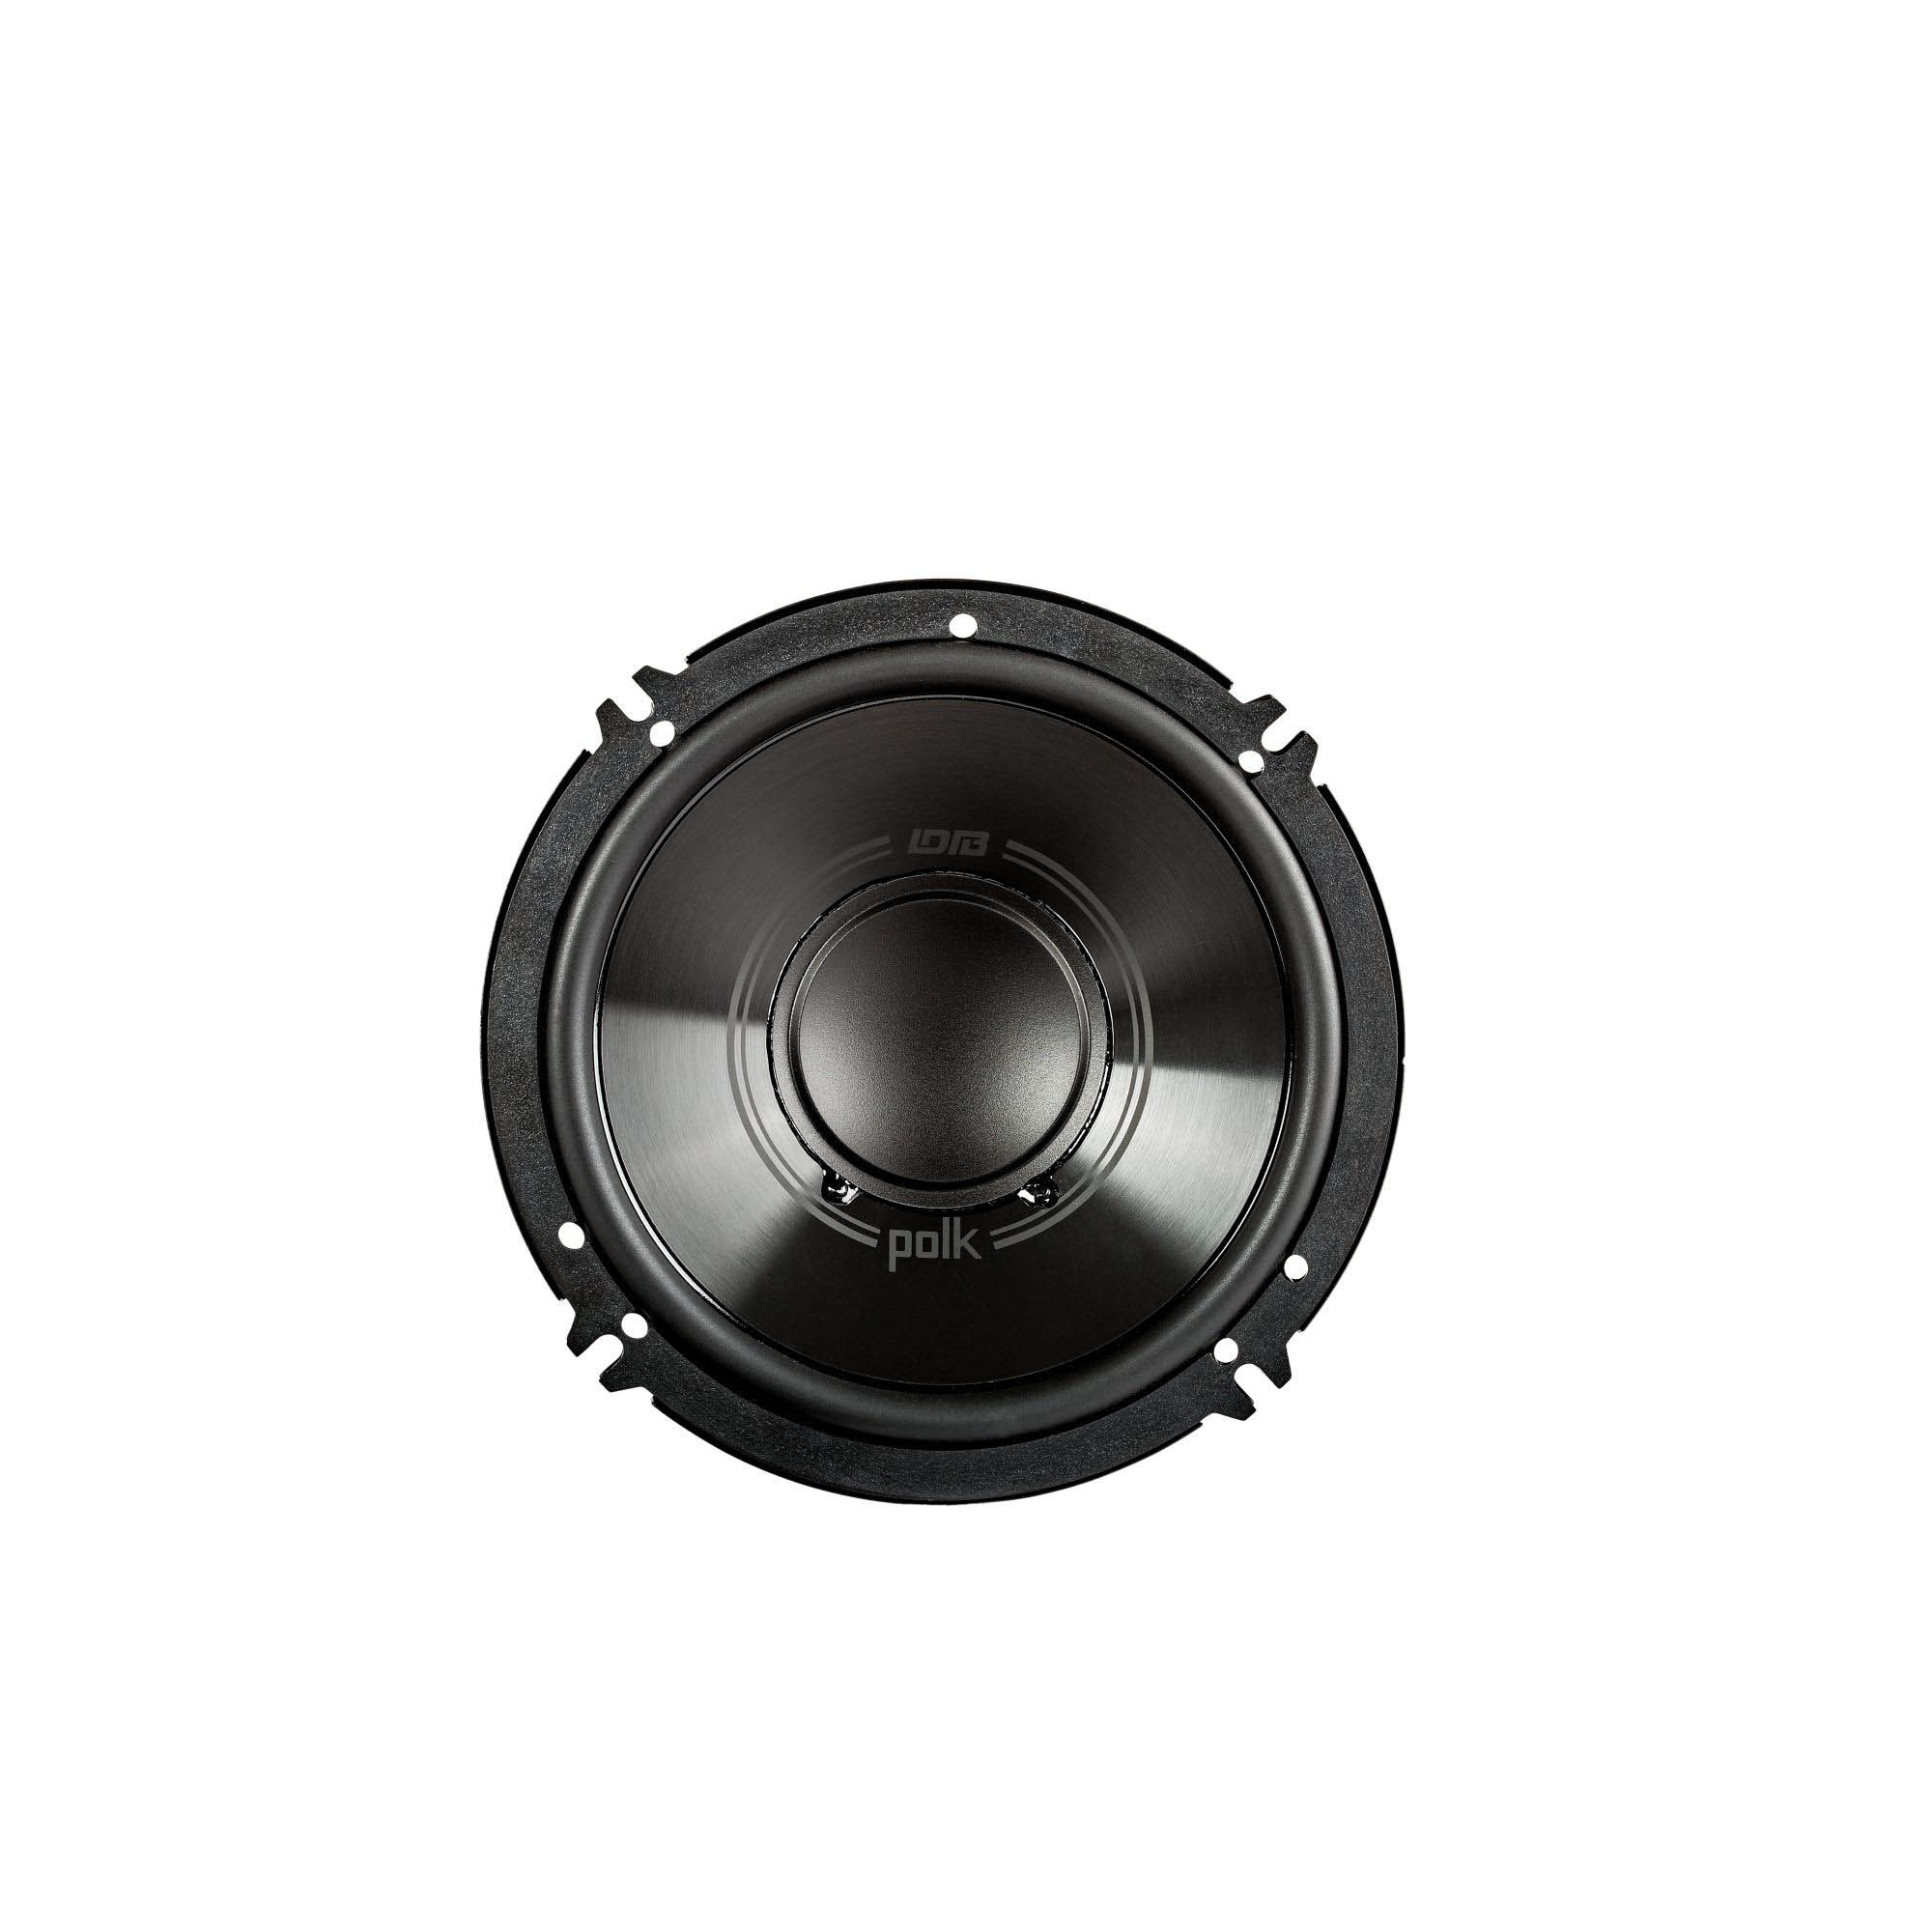 Polk Audio - A Pair Of DB6502 6.5" Components and A Pair Of DB572 5x7" Coax Speakers - Bundle Includes 2 Pair - image 3 of 7